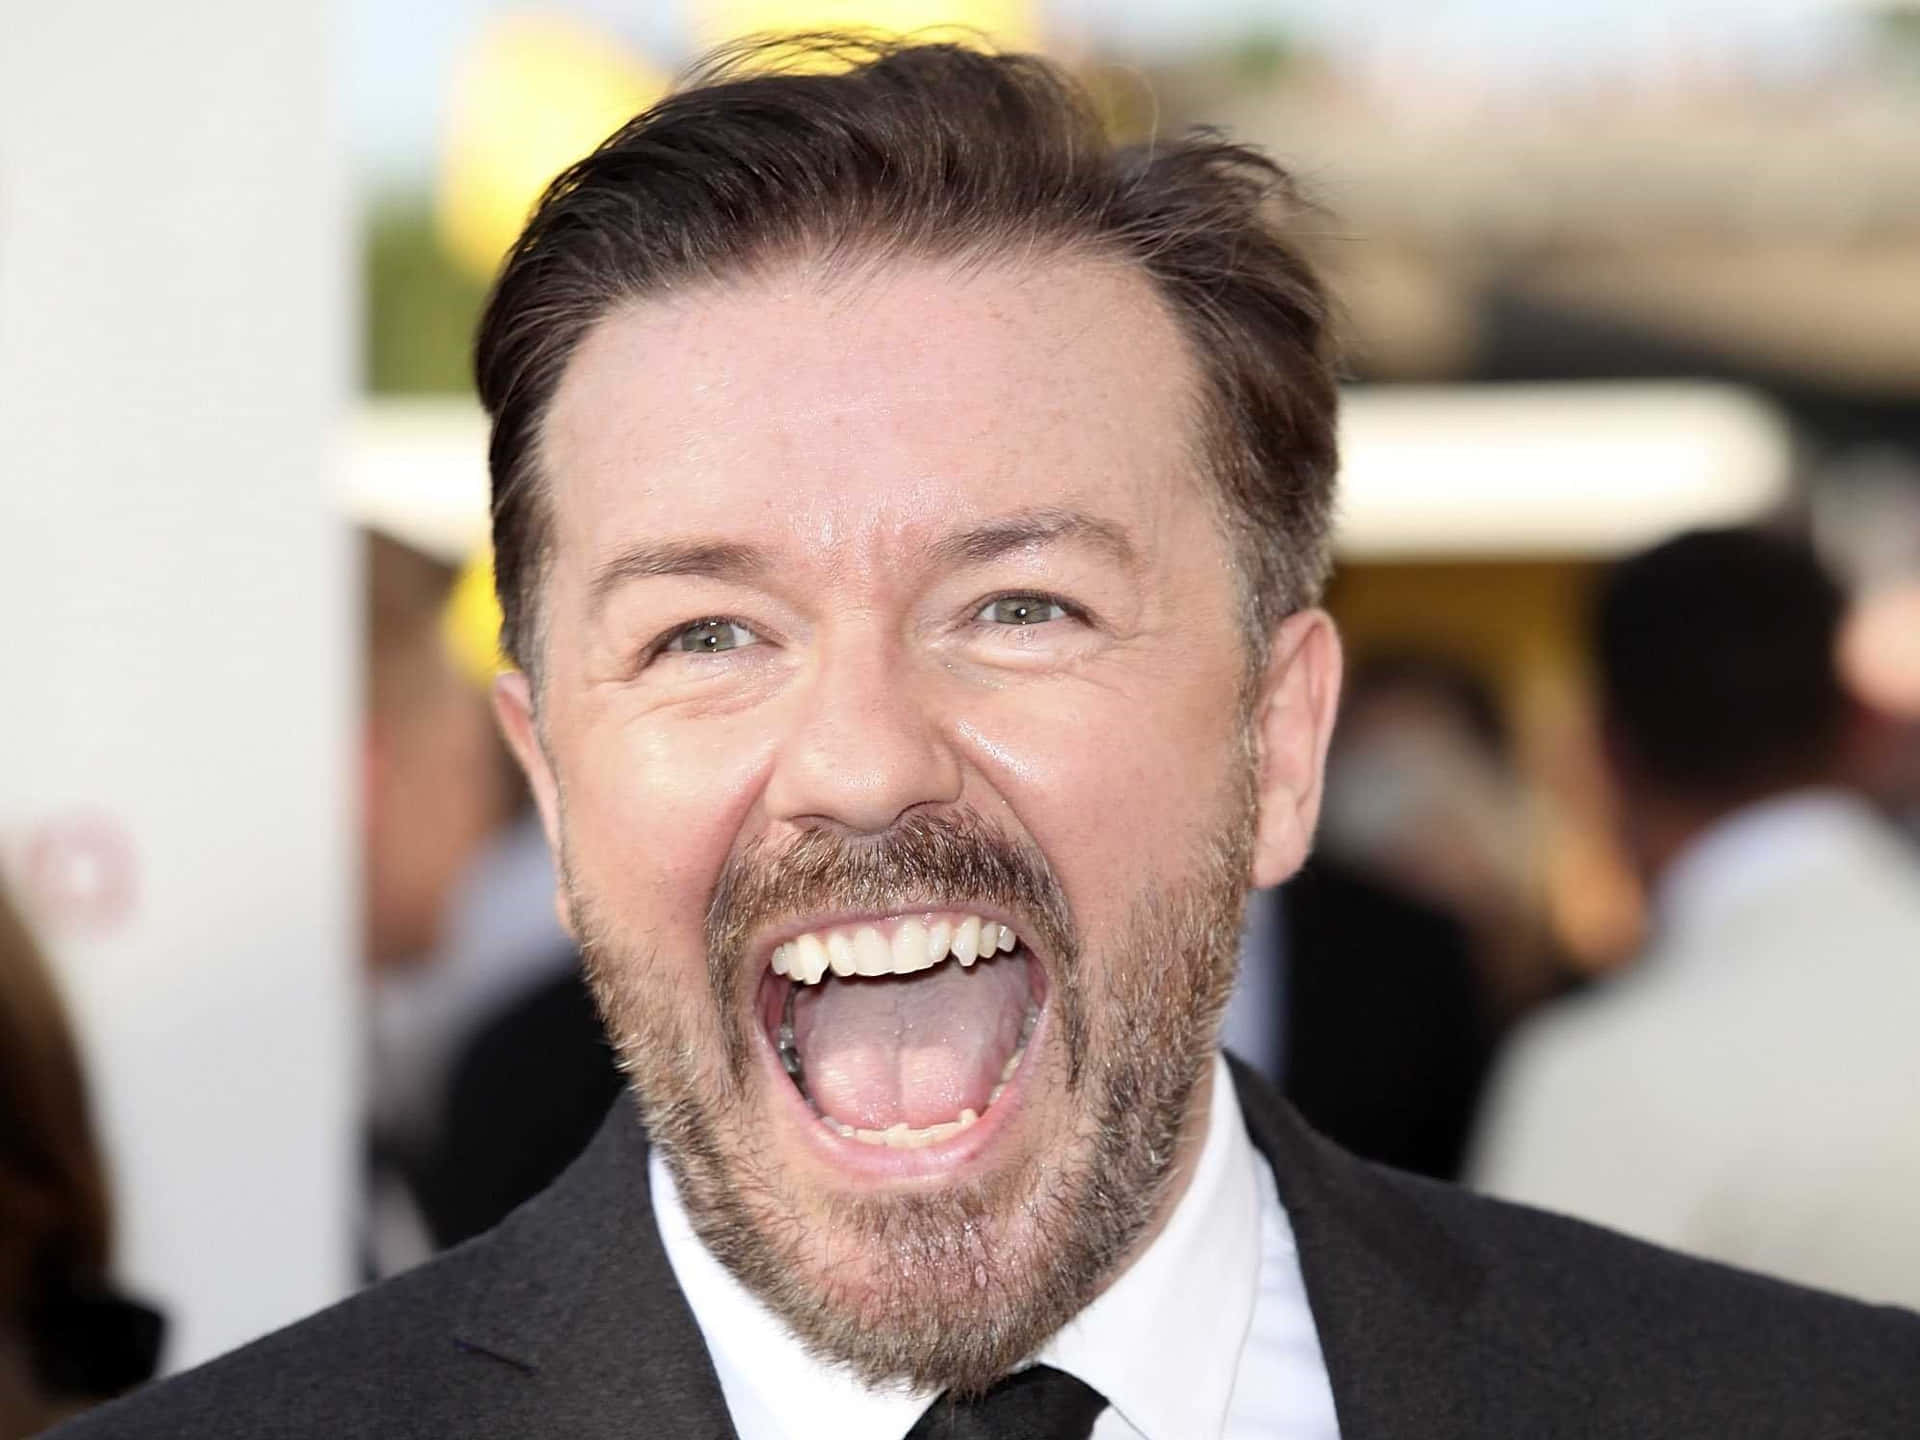 British Comedian and Actor Ricky Gervais Strikes a Pose Wallpaper